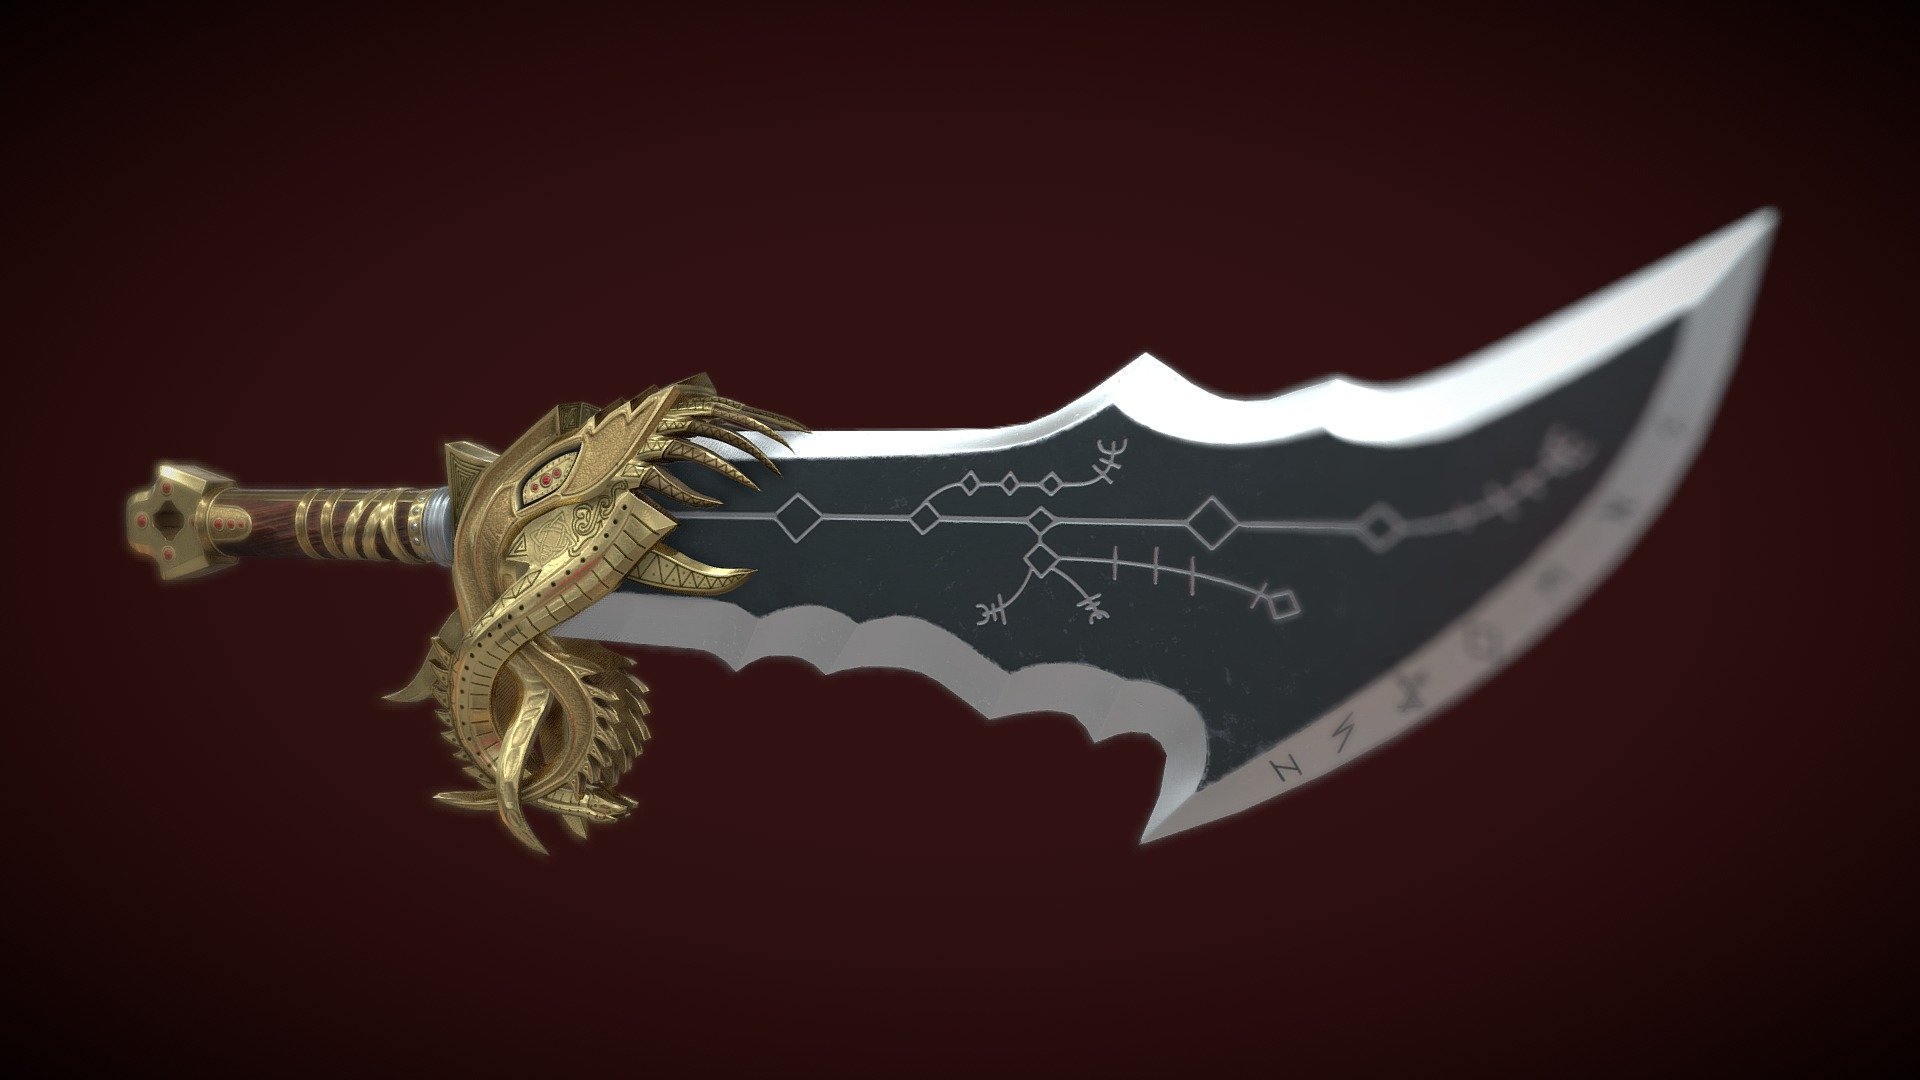 Download model: https://www.cg------trader.com/3d-models/military/melee/chaos-blades-6c011bcc-b8d0-4eda-8eb7-29c8a9b52f07

This is the best version of Kratos sword, for use in animations, renders, games, printing&hellip; etc.

The rar files contains various file formats: 


.obj


Specifications:



Vertices: 4187
Polygons: 7338
Materials: 1
Textures: 



Model including all PBR textures set.(512 - 4k)


Diffuse/Albedo
Metallic
Roughness
Normal(OpenGL, Direct x) 
Height 
Ambient Occlusion

The .blend file is the original version prepared to render.

Feel free to ask any question or request modifications.
Visit my profile to find more products.


If you want to buy it, let me know in Instagram


Created in blender, Substance painter - Chaos blade God of War Ragnarok - 3D model by (v•Ä•₼.P•†•R•È) (@nagi2427) 3d model